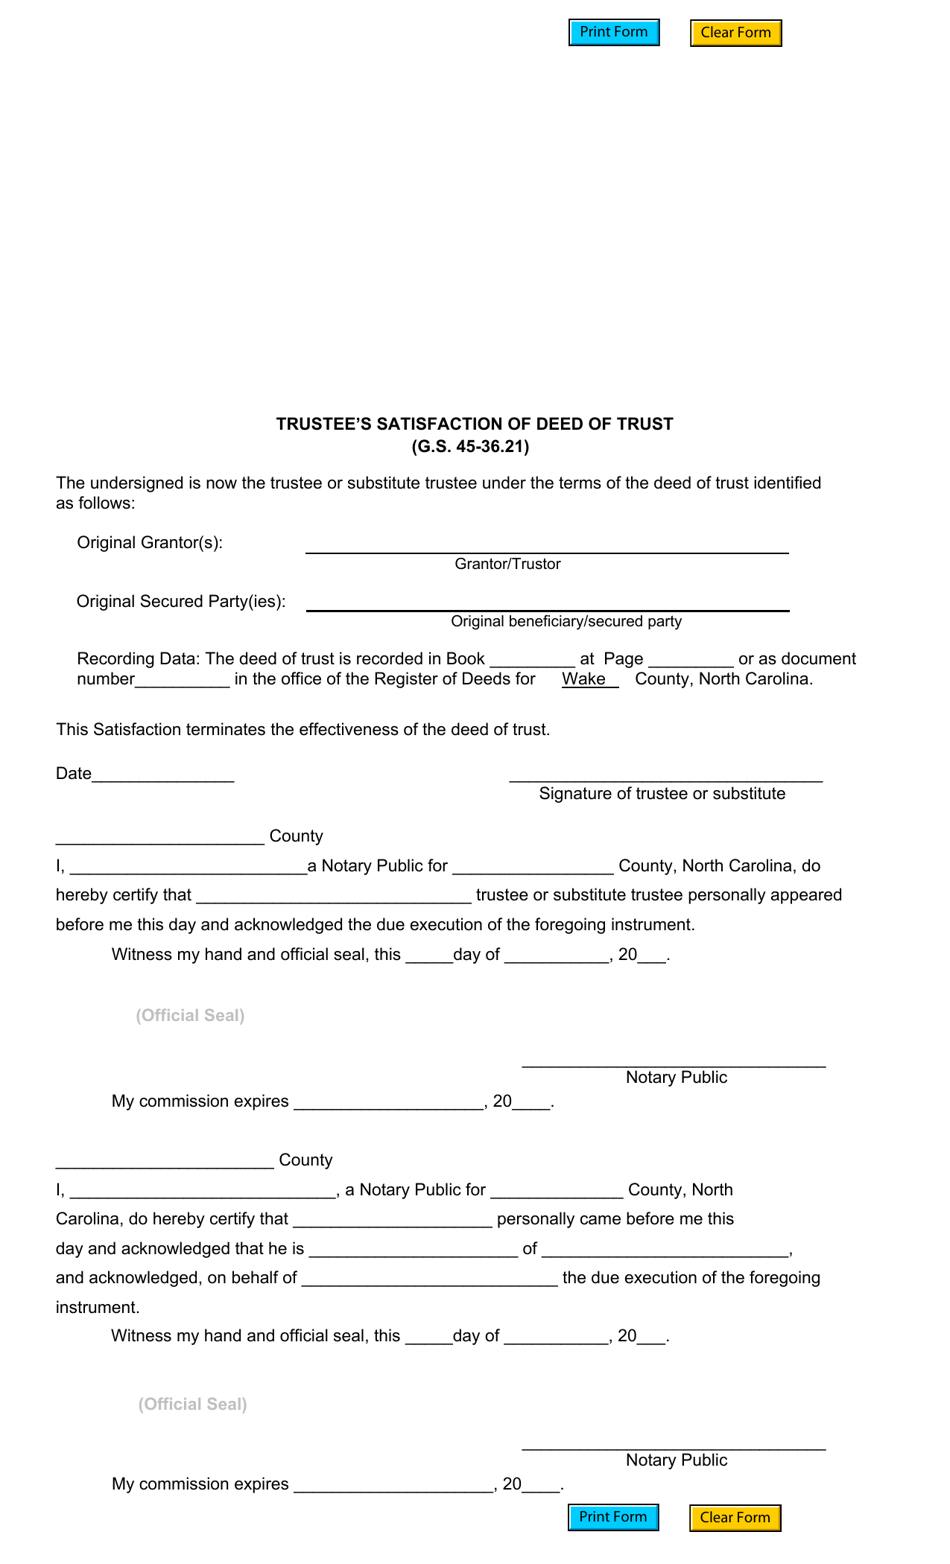 Trustees Satisfaction of Deed of Trust - Wake County, North Carolina, Page 1